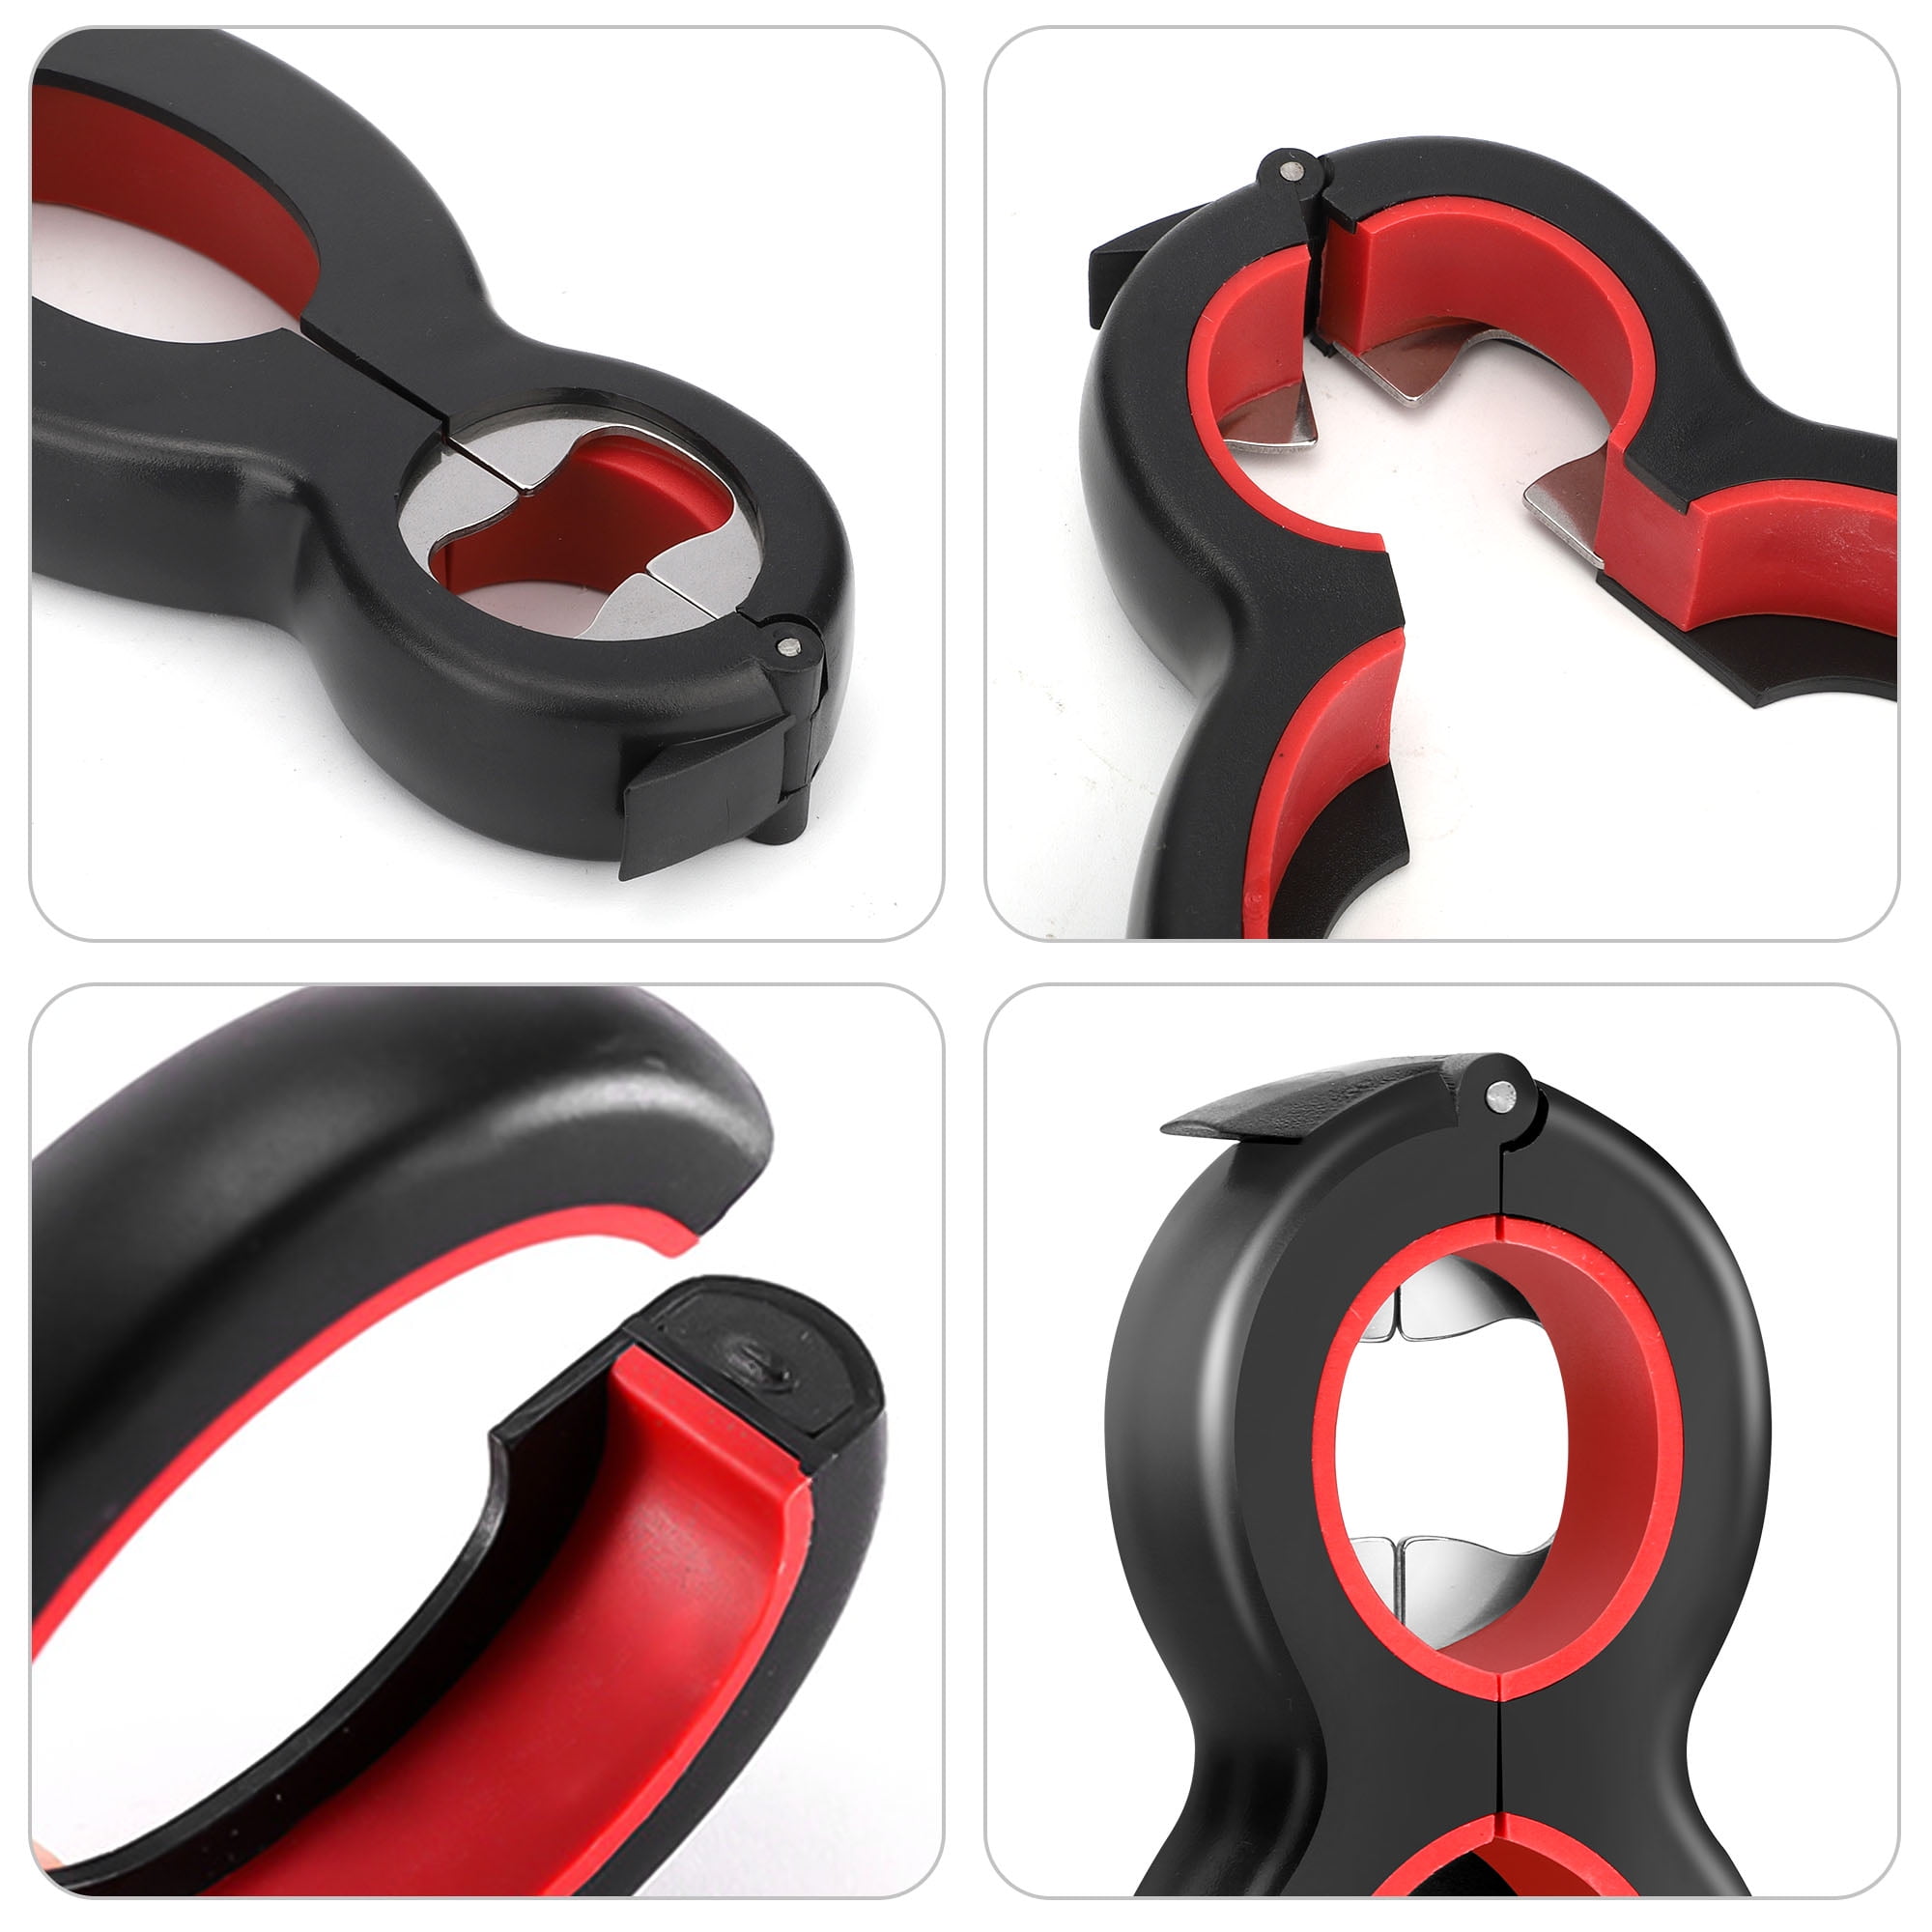 6pcs Jar Opener set.4pcs Silicone Jar Opener Gripper Pad.1 Bottle Opener  and 1 Stainless Steel Wine Opener for Sale in Brooklyn, NY - OfferUp